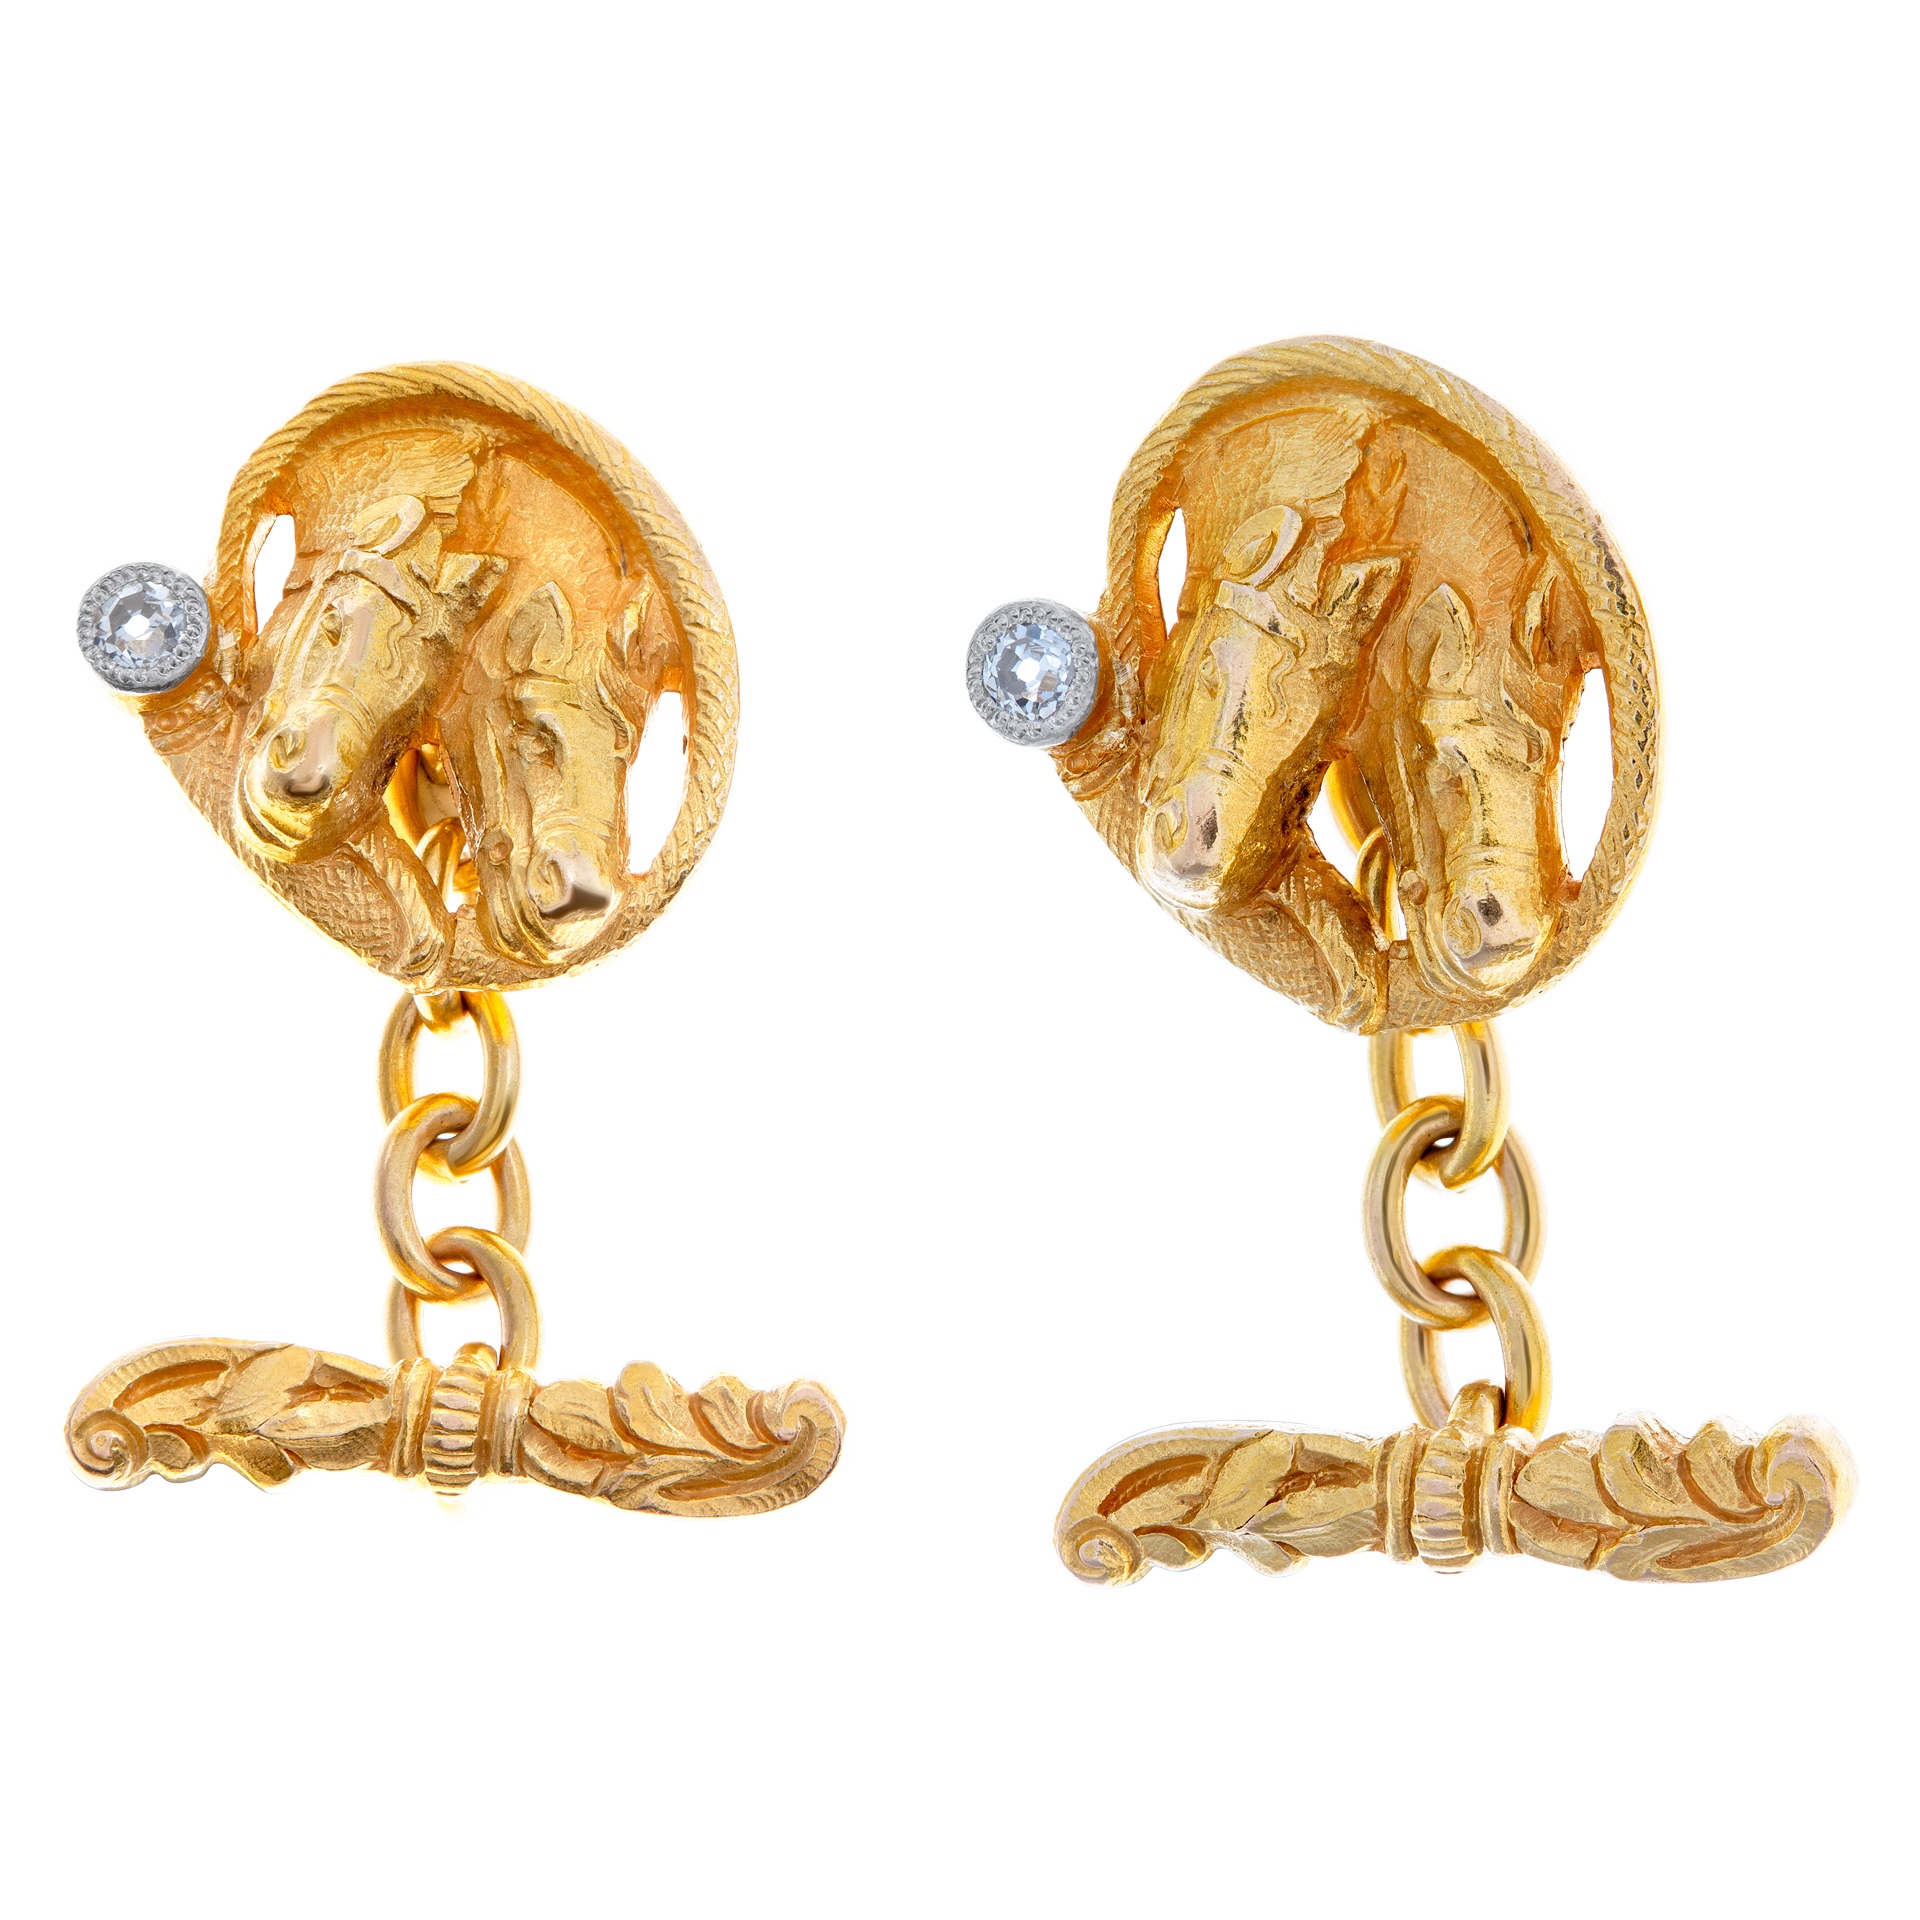 Vintage "Double Horse Heads" cufflinks in solid 18K yellow gold with 0.10 carat bezel set diamonds